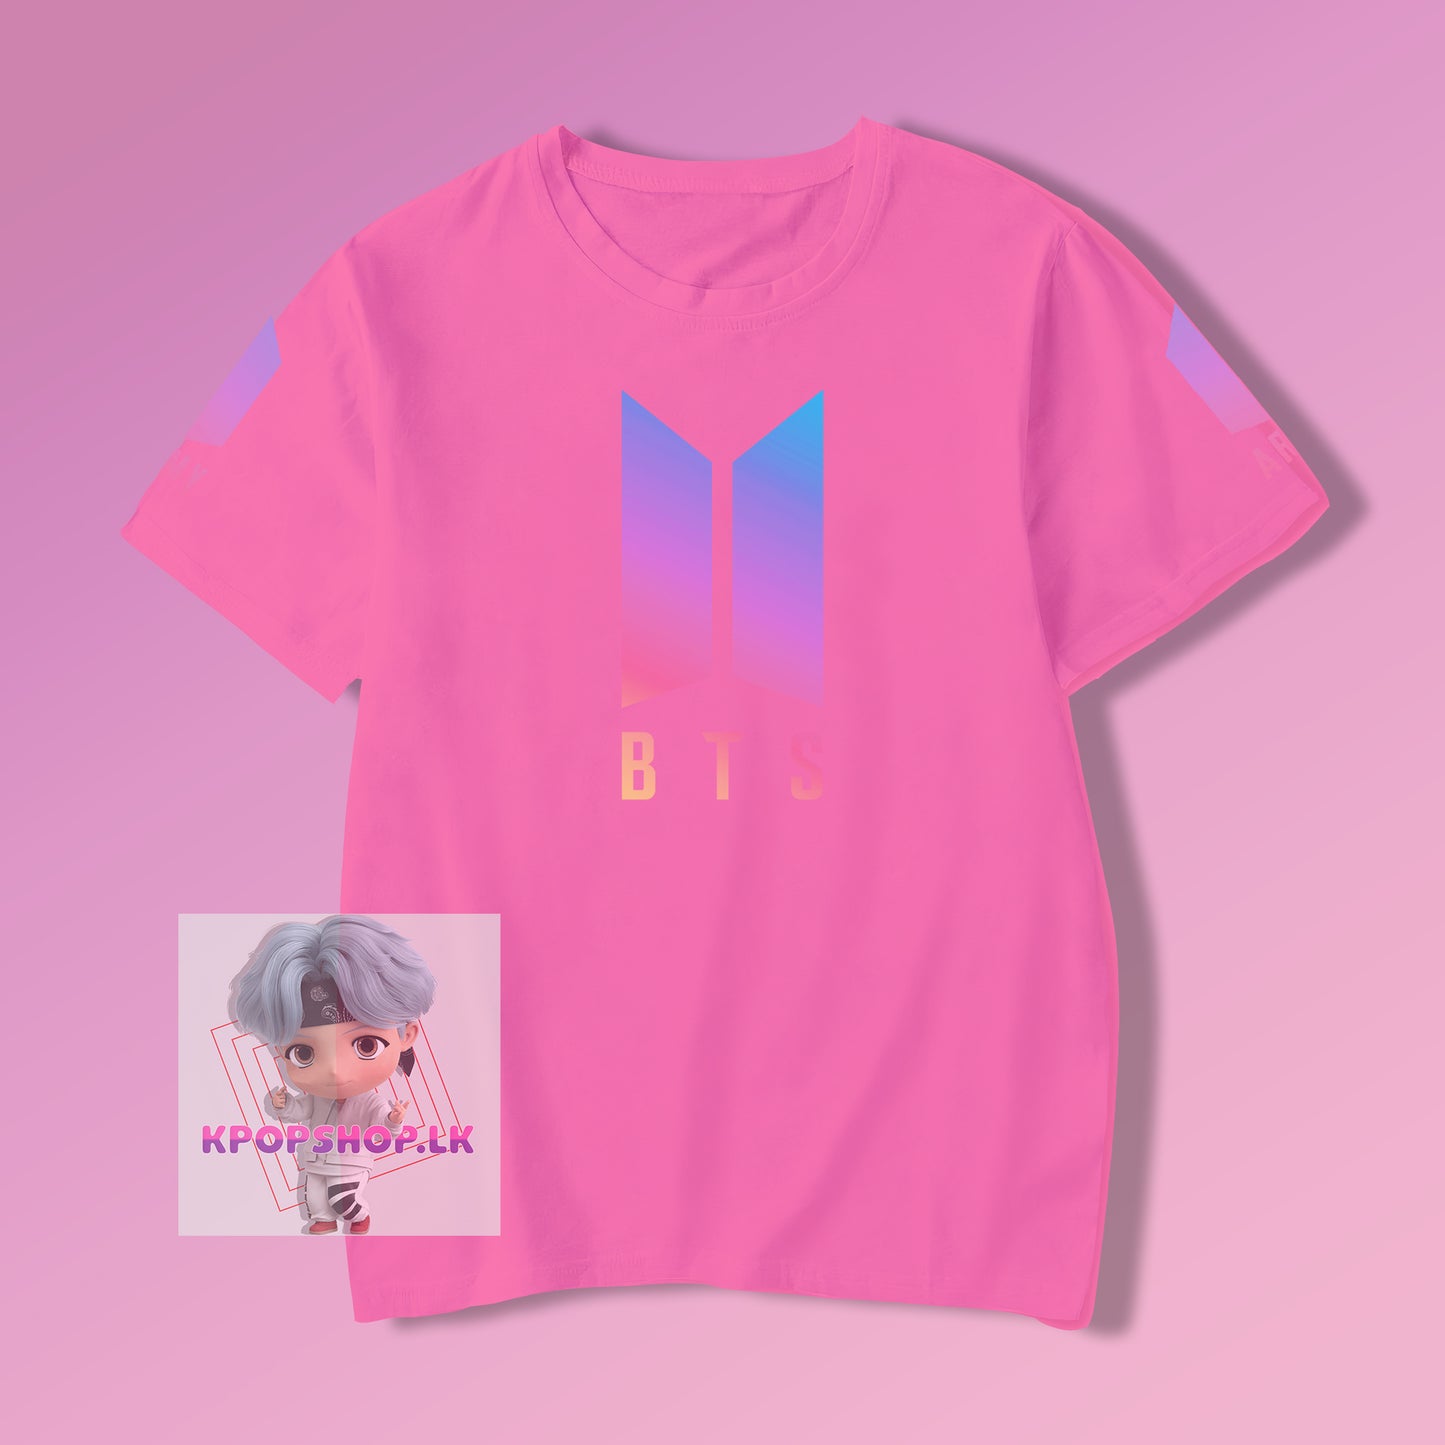 BTS And Army Logos KPOP T-shirt